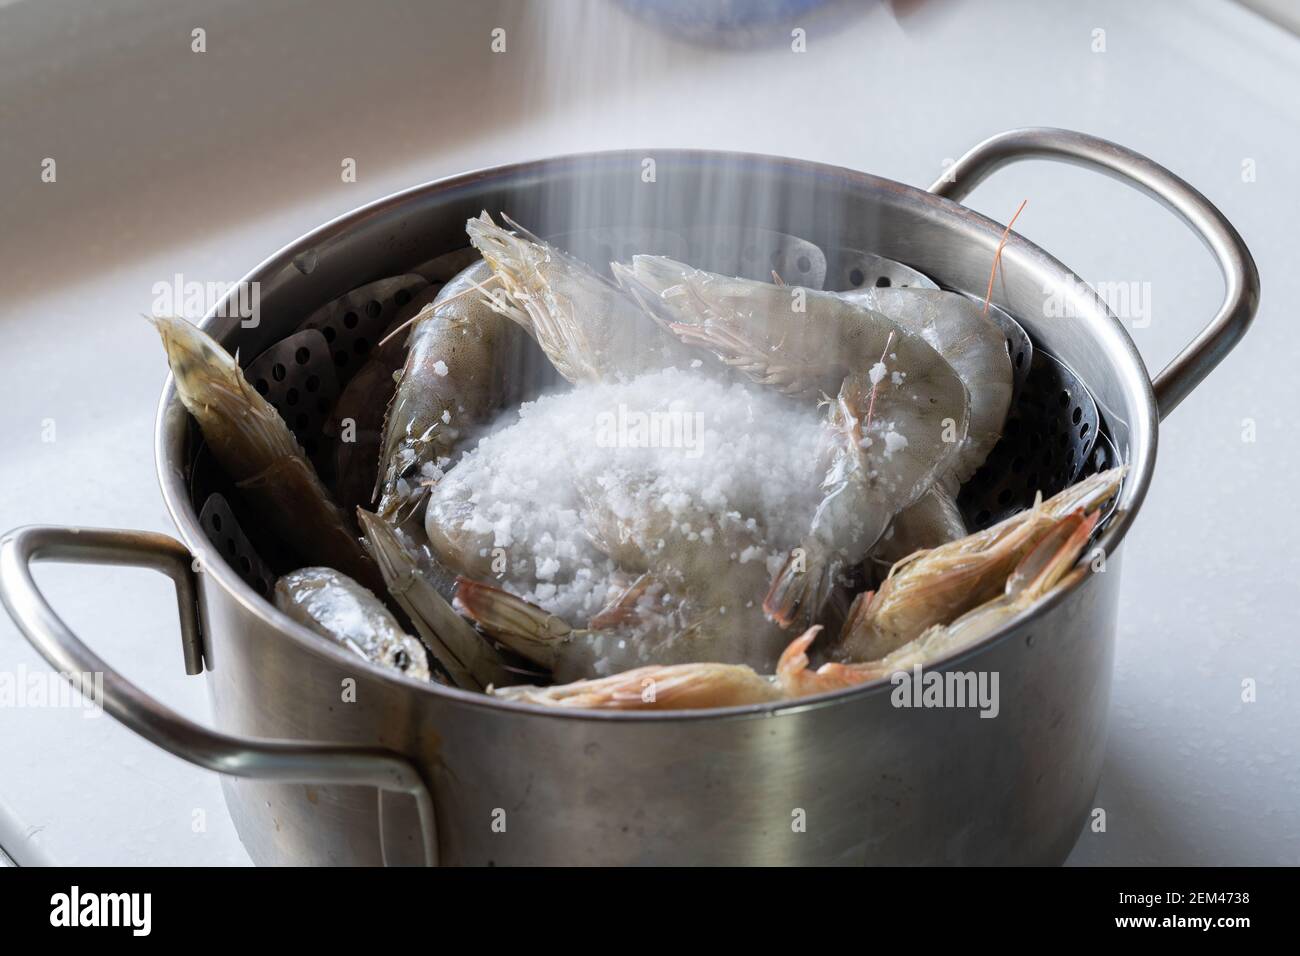 Home-cooked, salted and steamed shrimp. Stock Photo